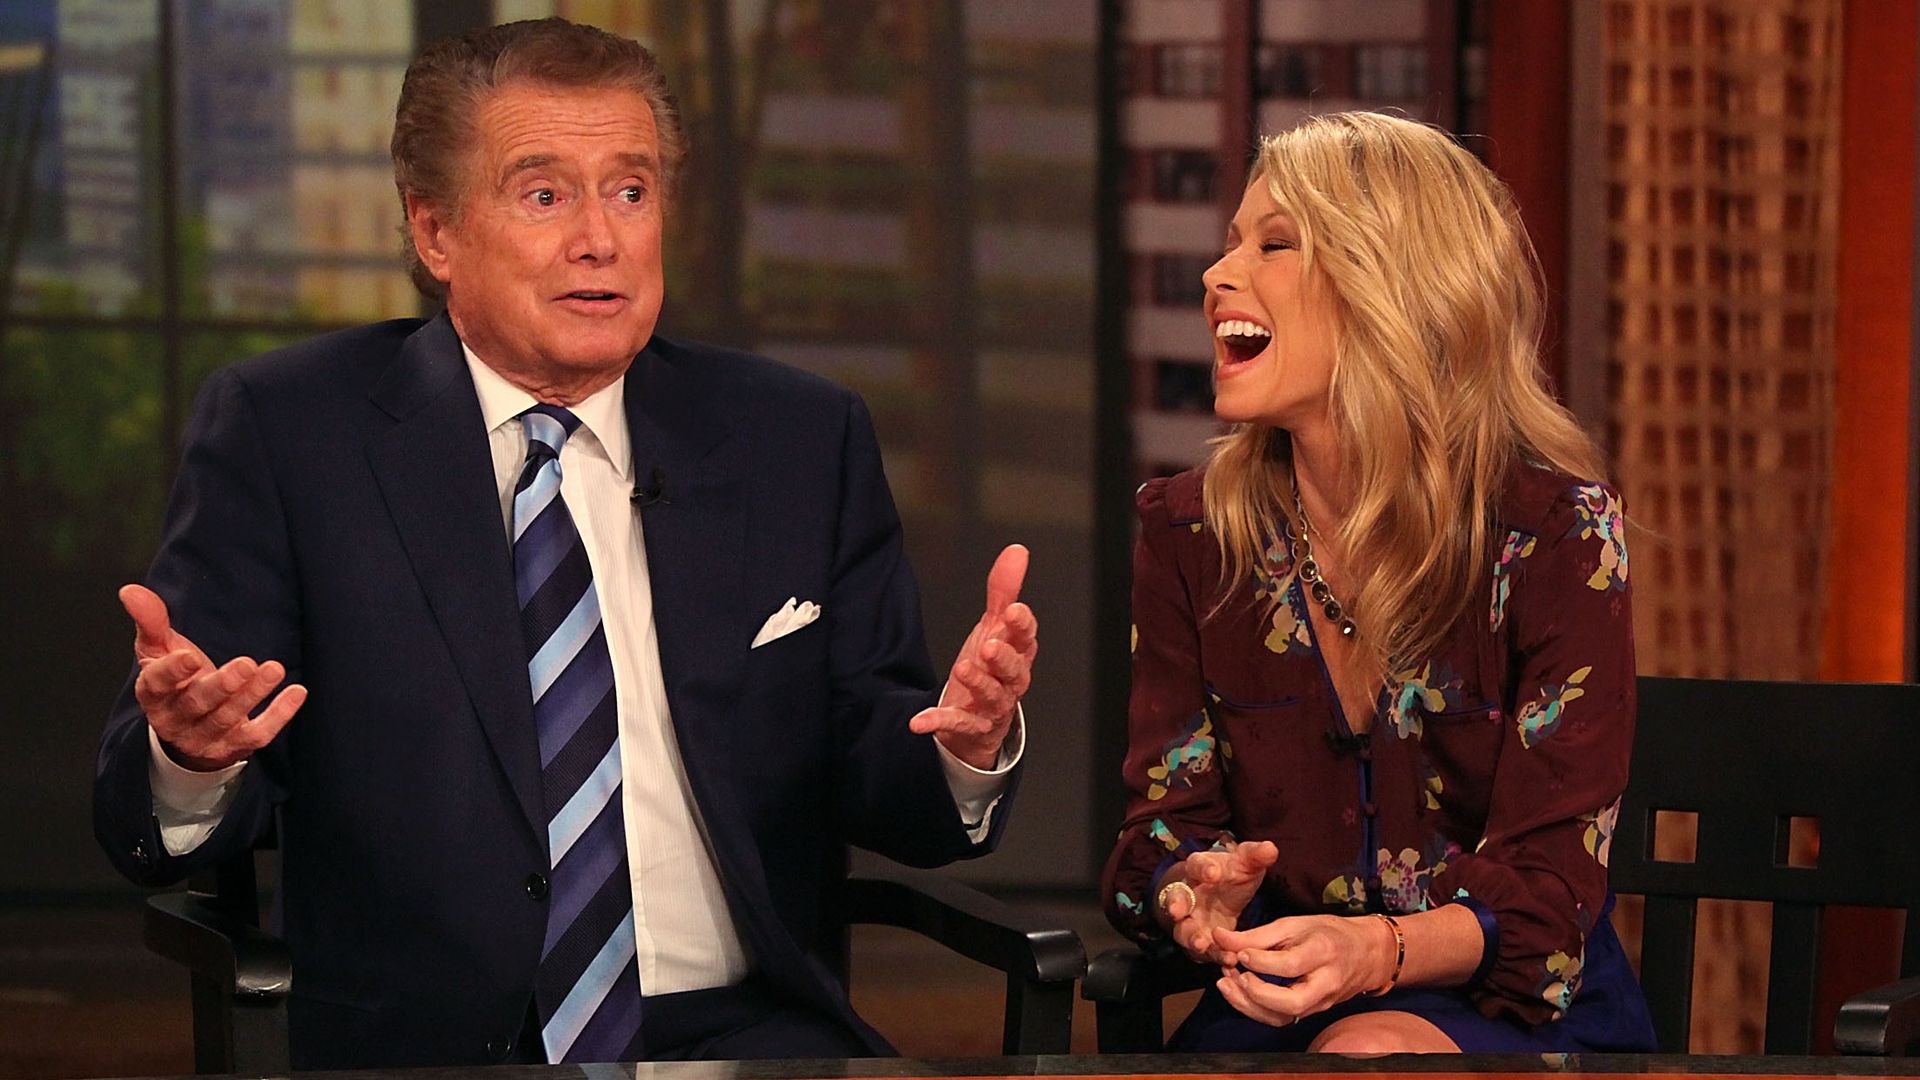 Regis Philbin clip shared for this surprise reason on Kelly Ripa's ...